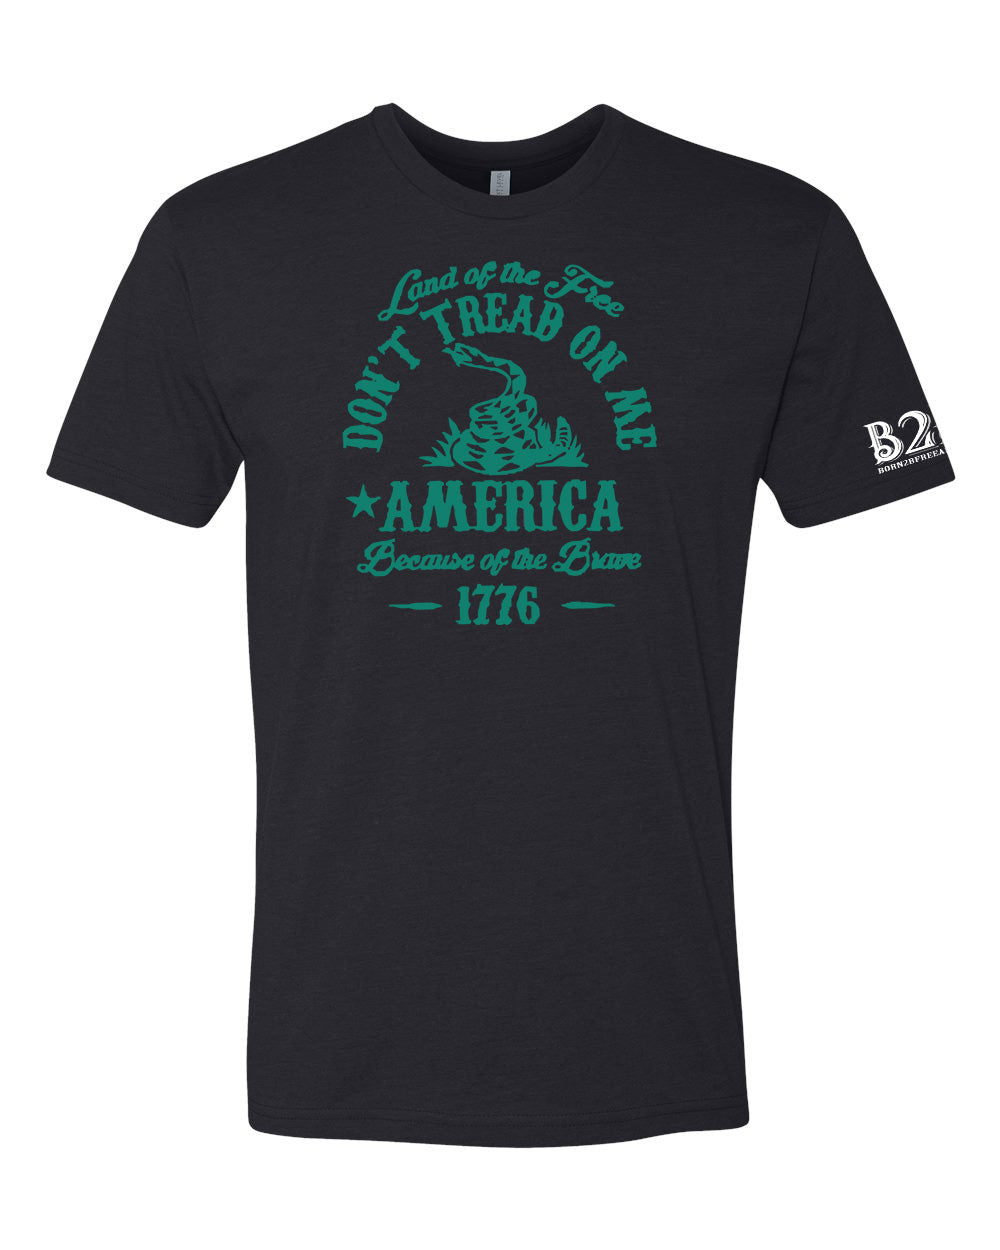 RTS Teal Don't Tread